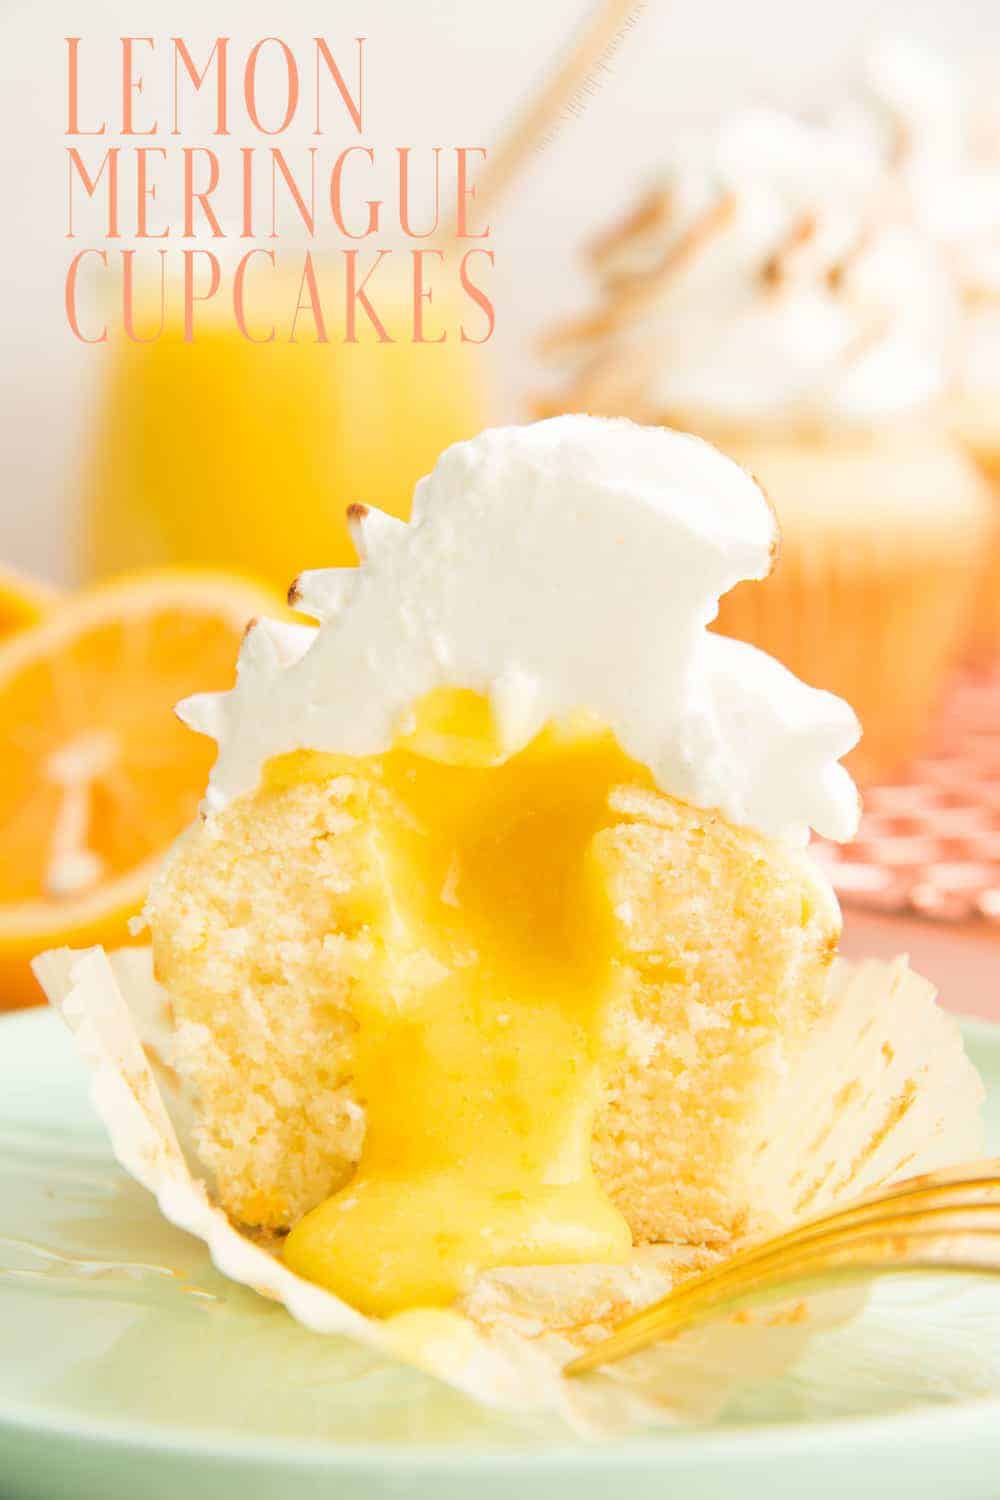 Lemon Meringue Cupcakes are making the classic dessert easier and crowd-friendly. Filled with a homemade or store-bought lemon curd, these buttery cupcakes are topped with a fluffy Swiss meringue before being toasted. Great for your Spring or Summer dessert tables. #lemonmeringuecupcakes #lemonmeringuerecipe #meringue #lemoncurd #lemondessertrecipe #lemondessert #classicdessertrecipes #baking #Swissmeringue #Filledcupcakes #fruitcurd #cupcakerecipe #cakerecipe #soulfood #lemonmeringuepie via @ediblesense